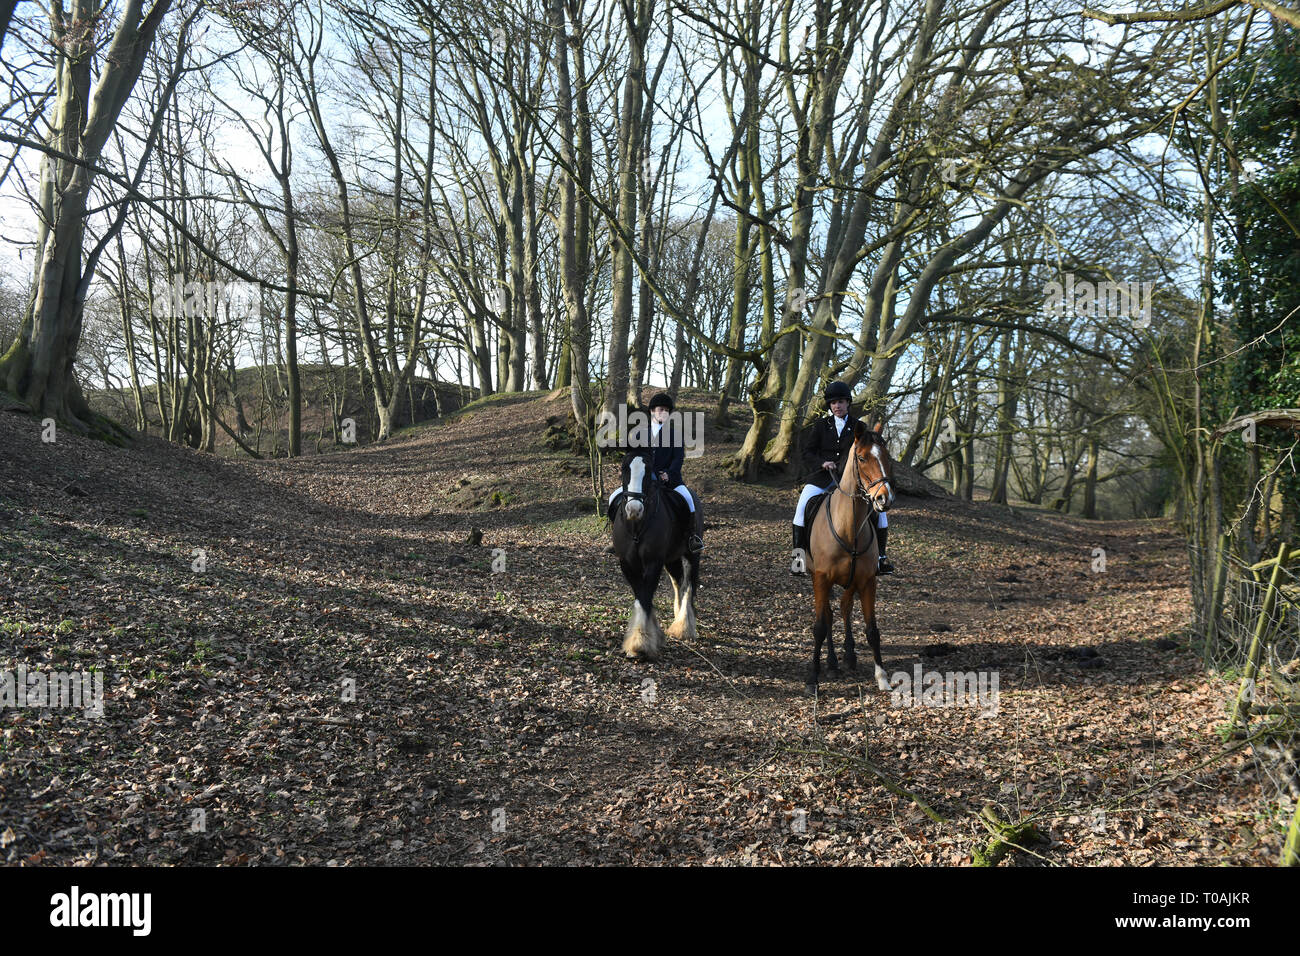 Horse riders riding in woodlands England Uk Stock Photo